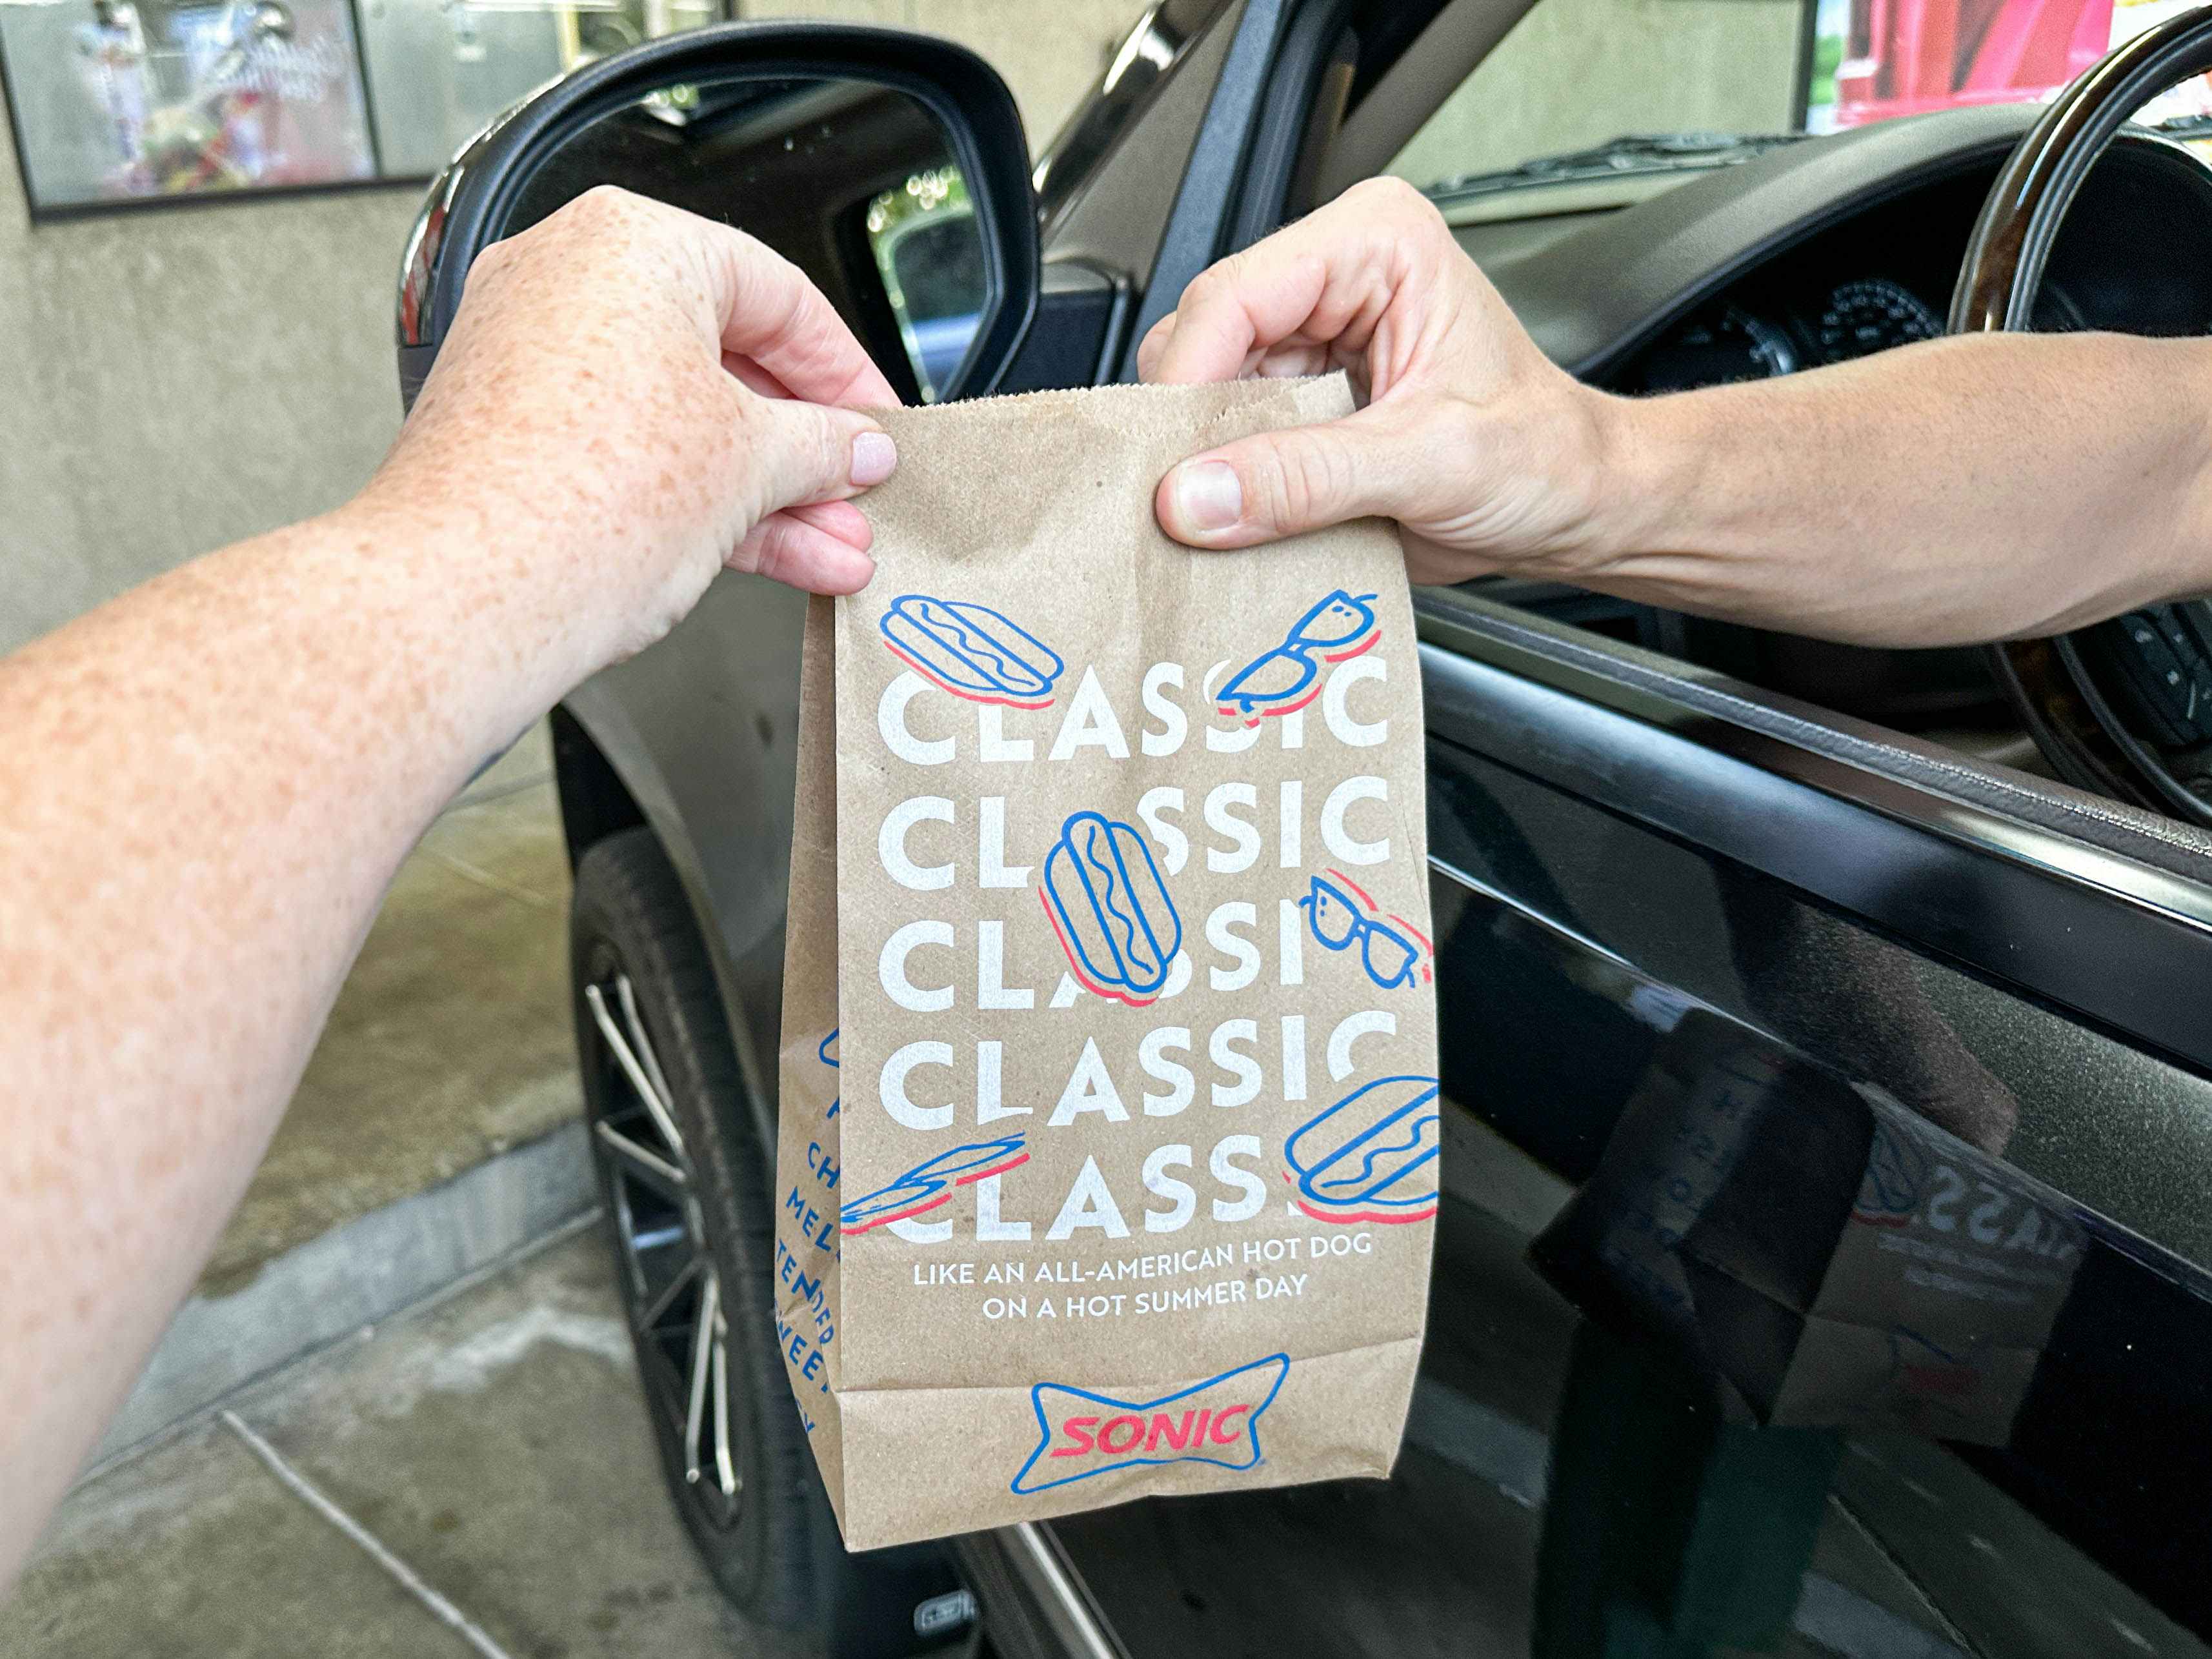 a person handing a sonic bag to a person to a person sitting in a car